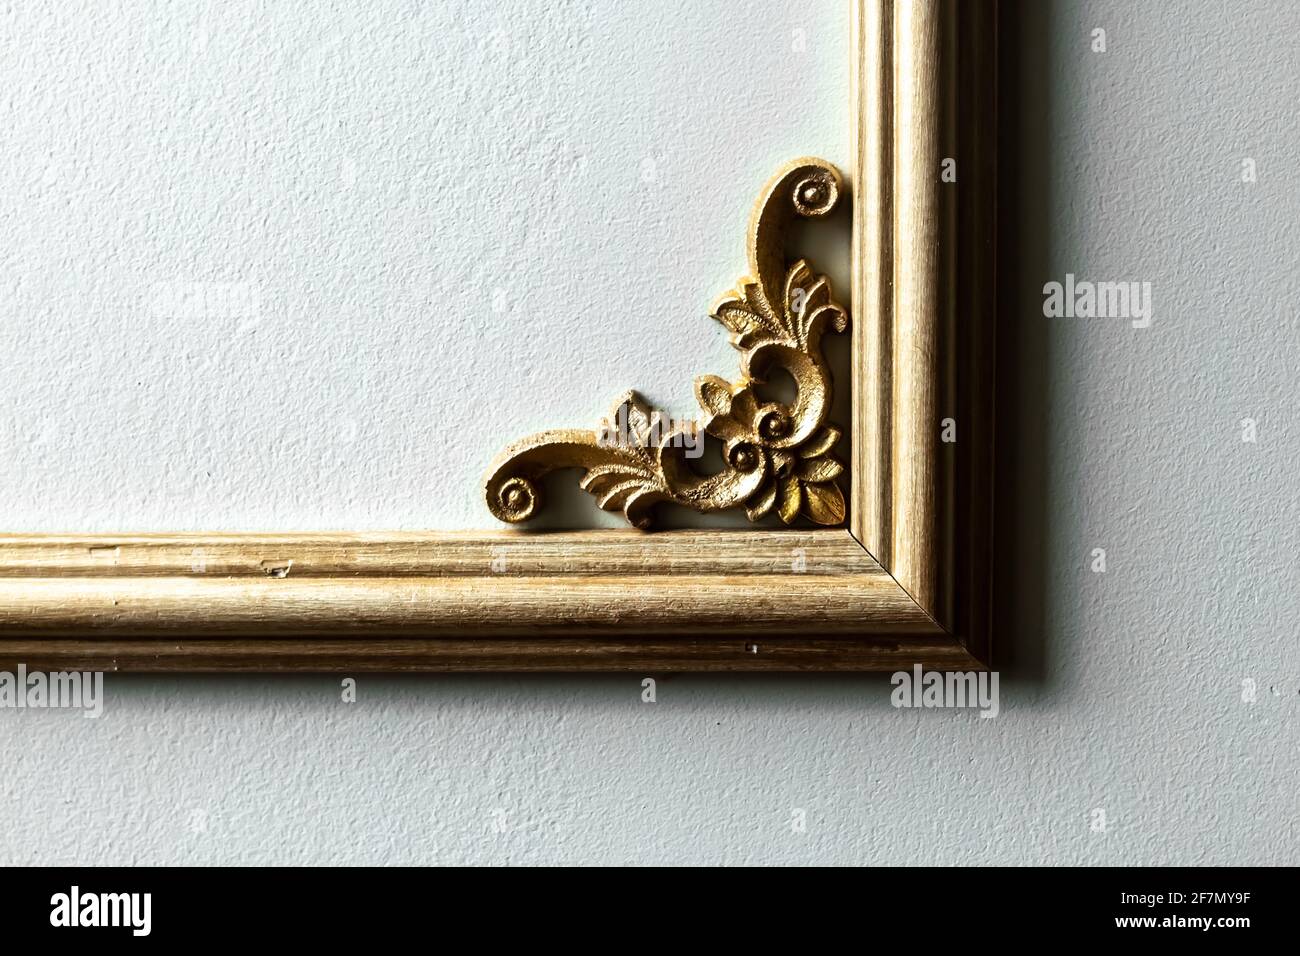 Closeup of a gold painted wooden wall frame with a floral motif in the corner against a pale green wall. Design inspired by french classical romantic. Stock Photo